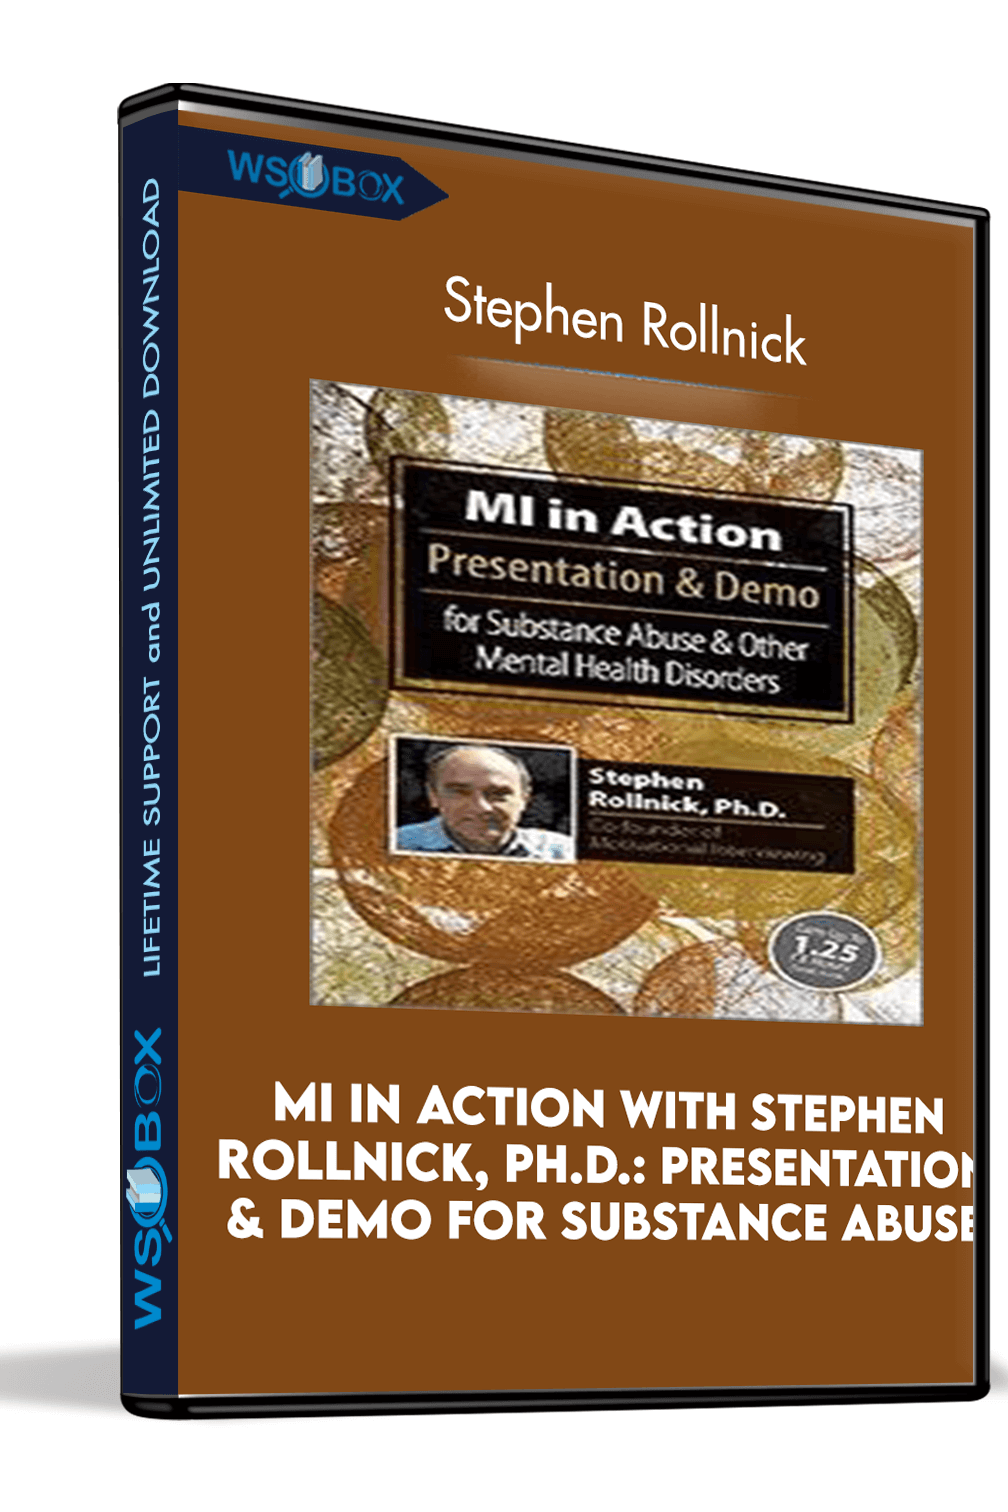 MI in Action with Stephen Rollnick, Ph.D.: Presentation & Demo for Substance Abuse & Other Mental Health Disorders – Stephen Rollnick